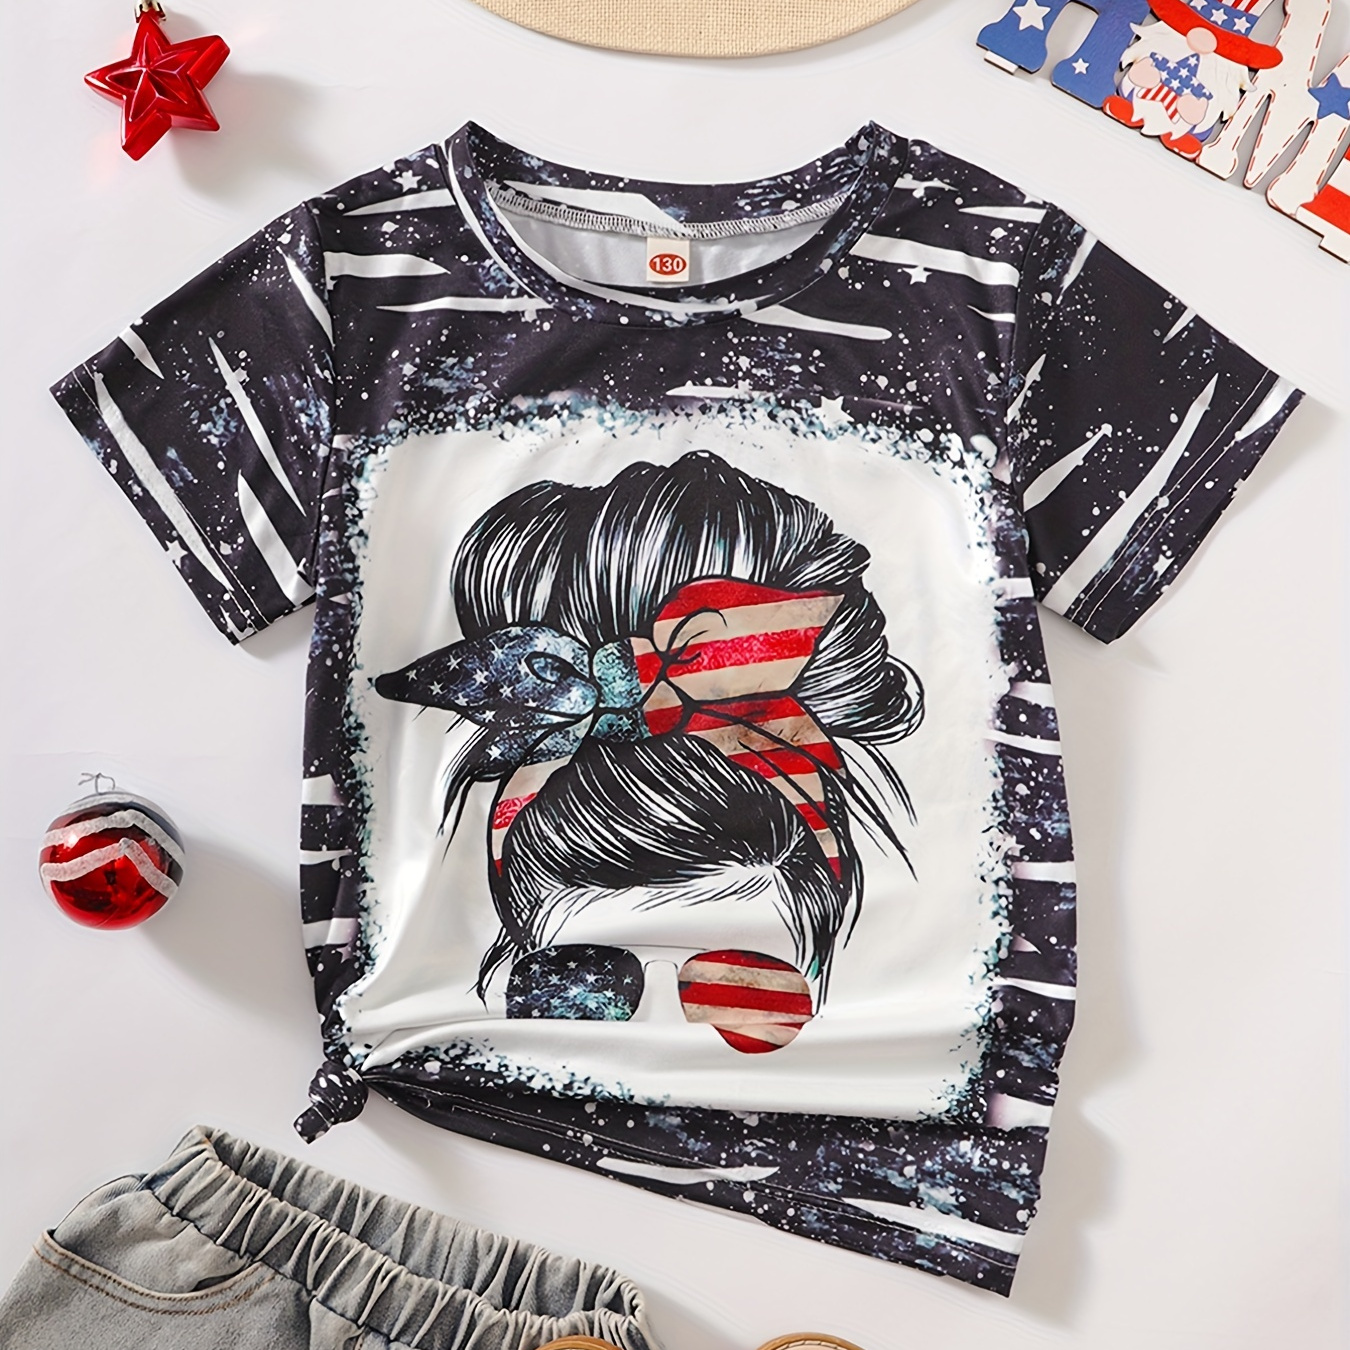 

Girls Casual Cute Cartoon Flag Girl Graphic Short Sleeve T-shirt For Summer Holiday Party